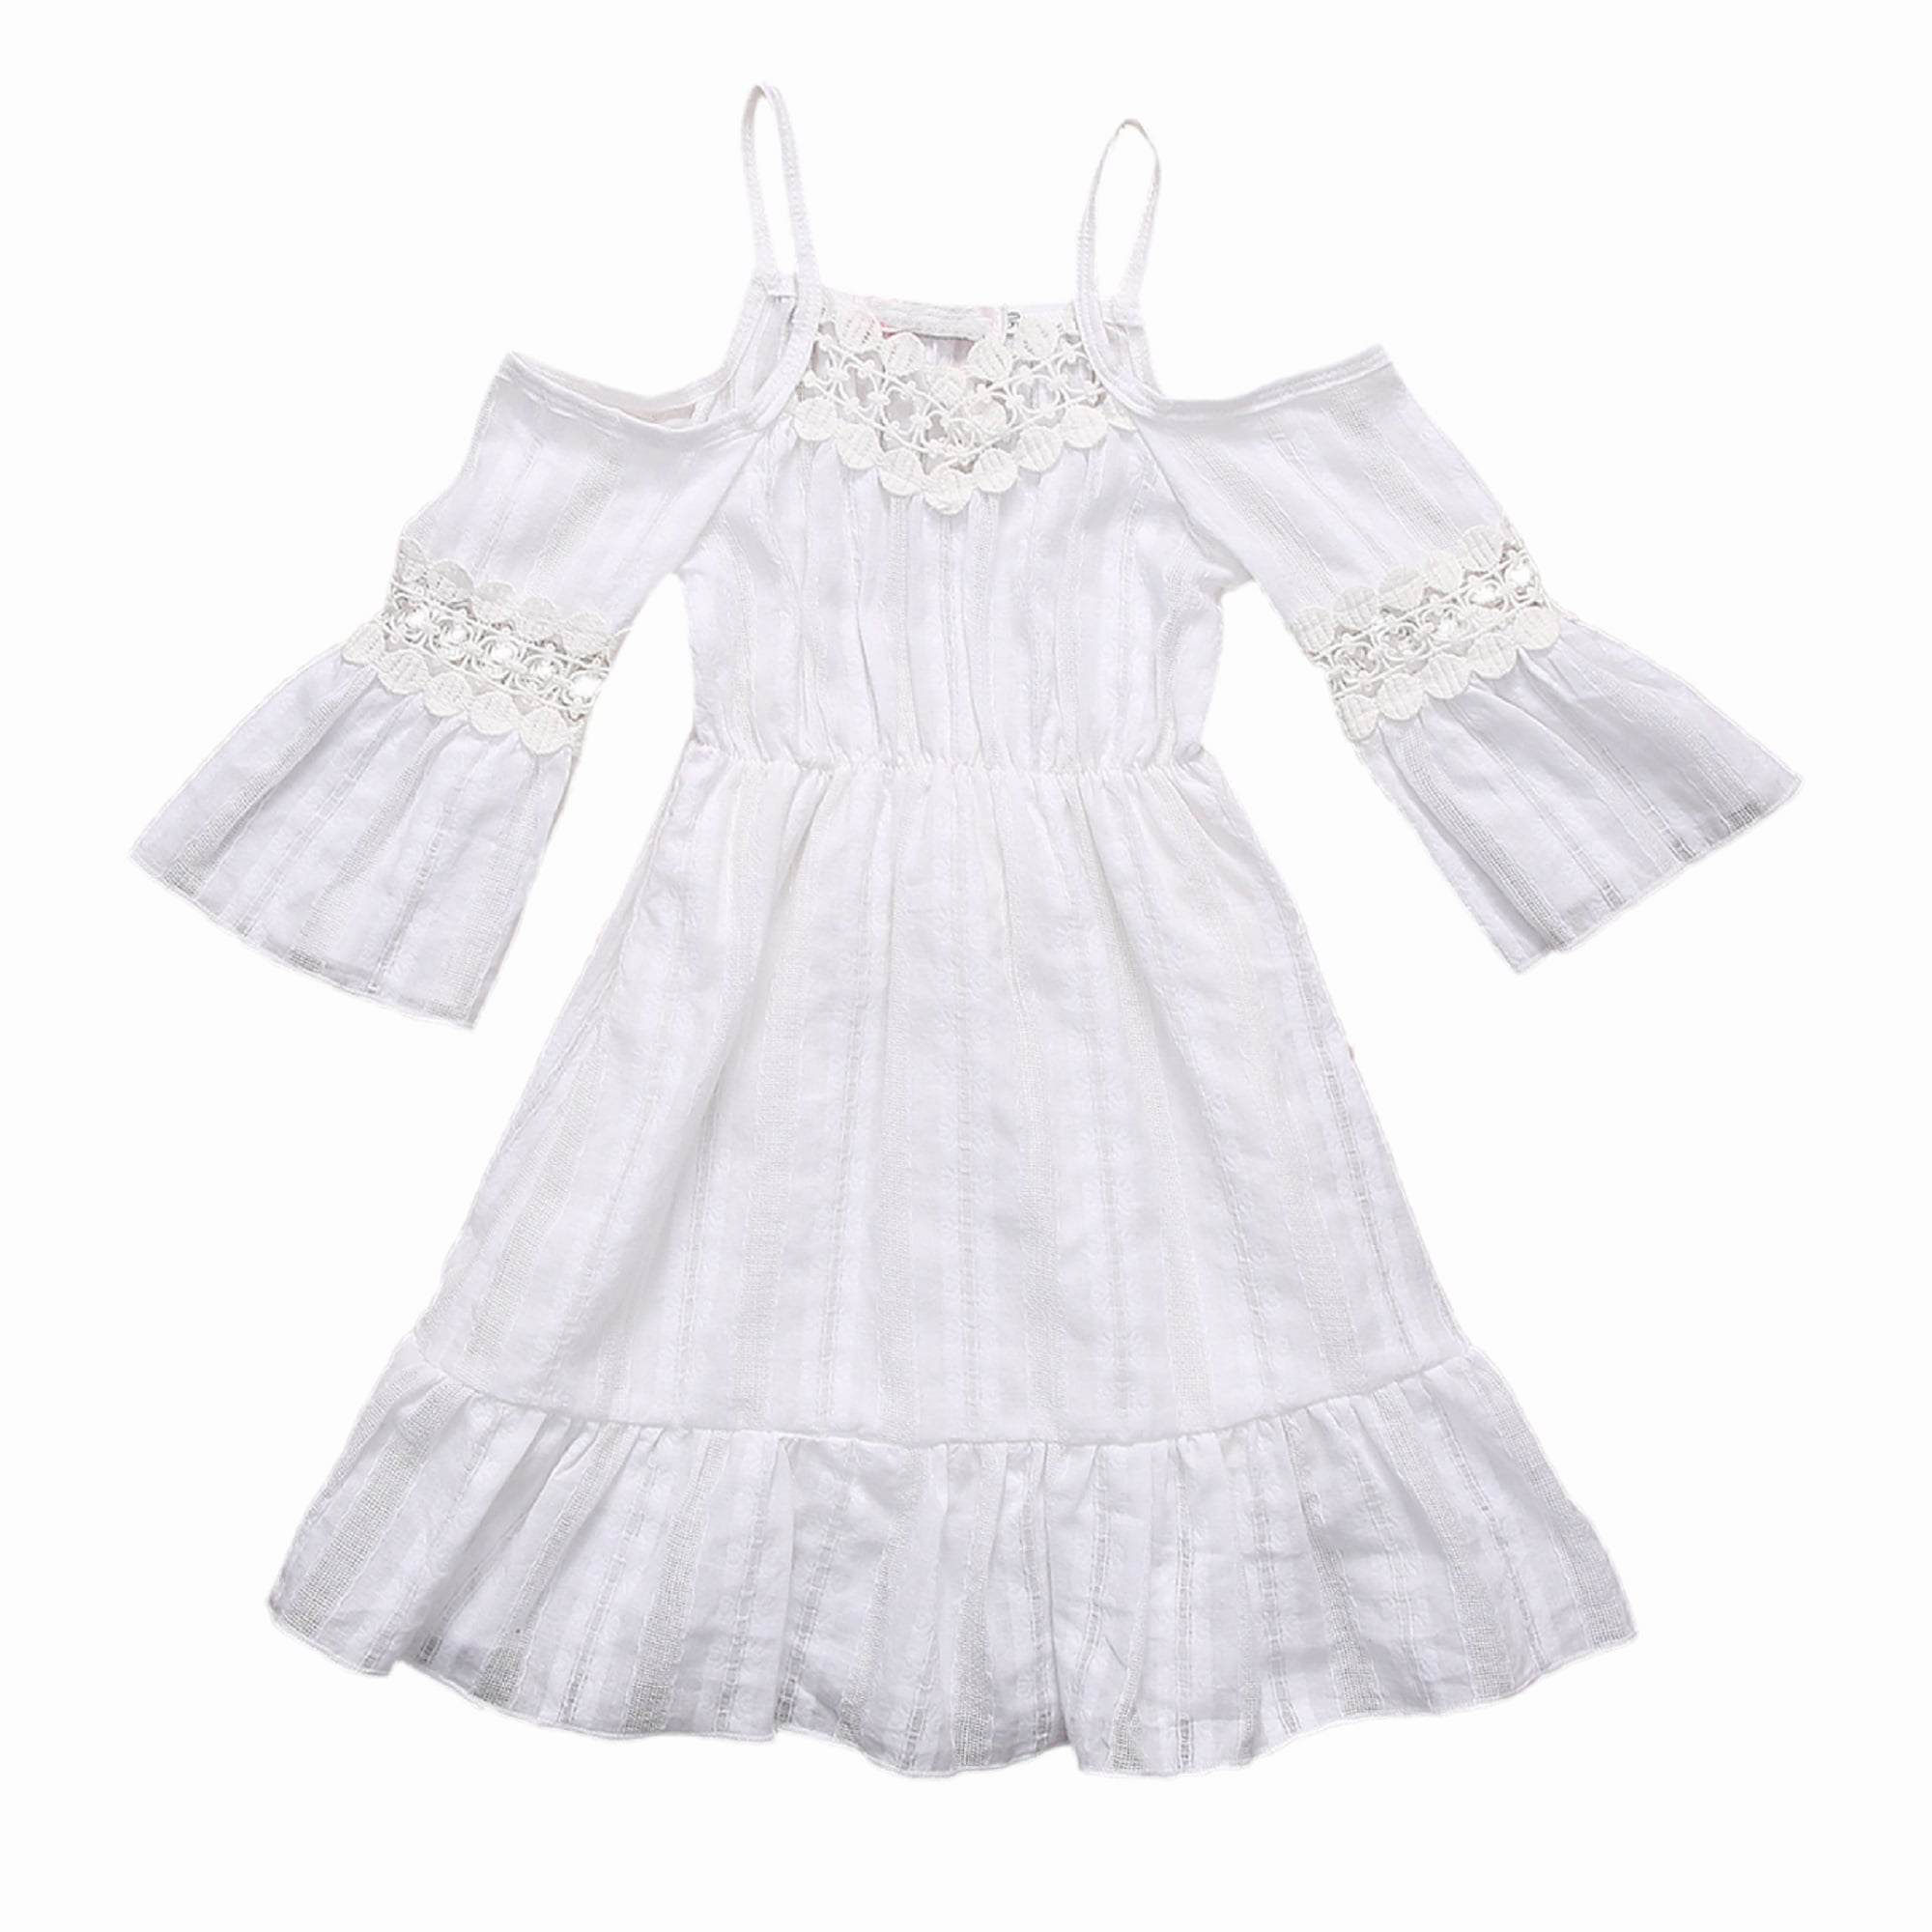 Princess Kid Baby Girl Dress Lace Floral Off Shoulder Party Gown Pop Street Show 